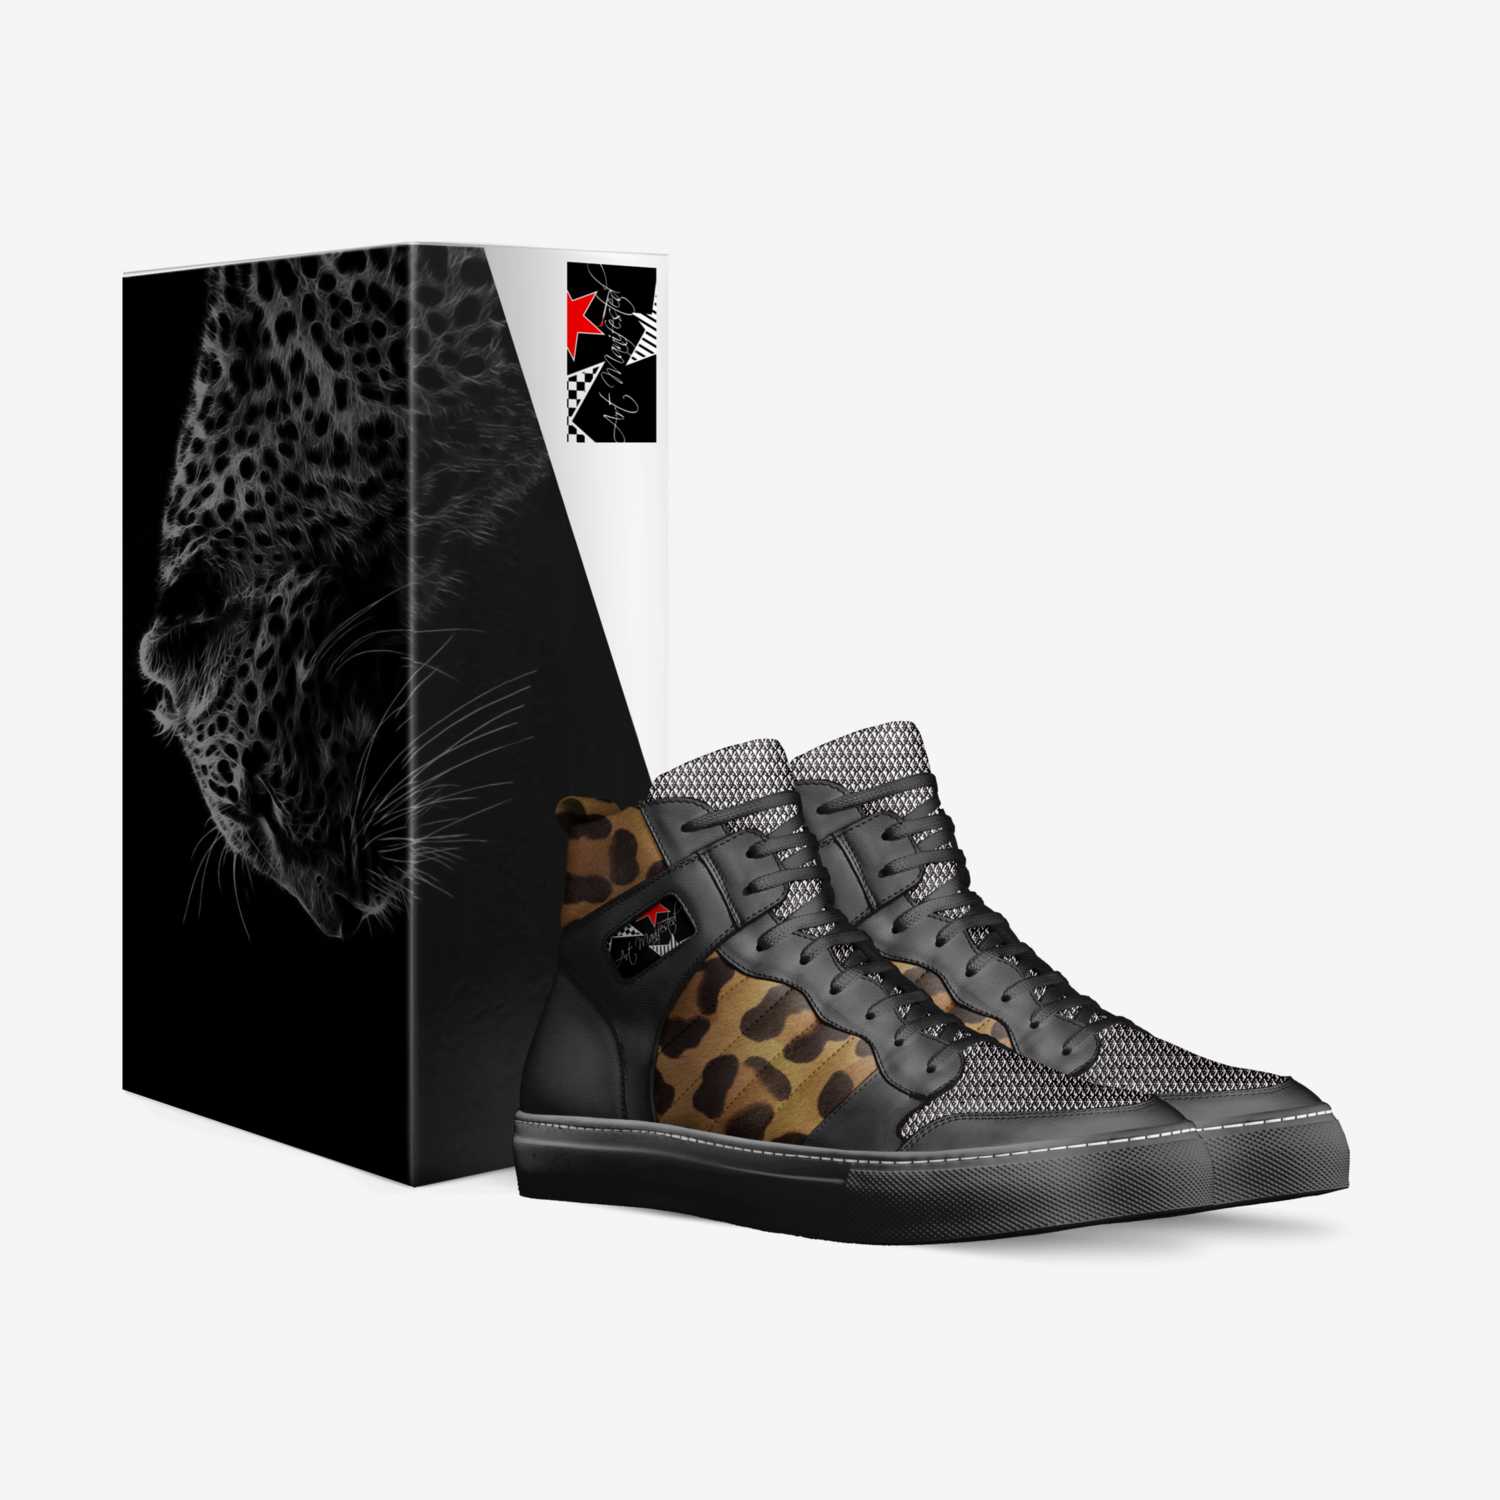 CHEETA PANTHA custom made in Italy shoes by E. Mccalla | Box view